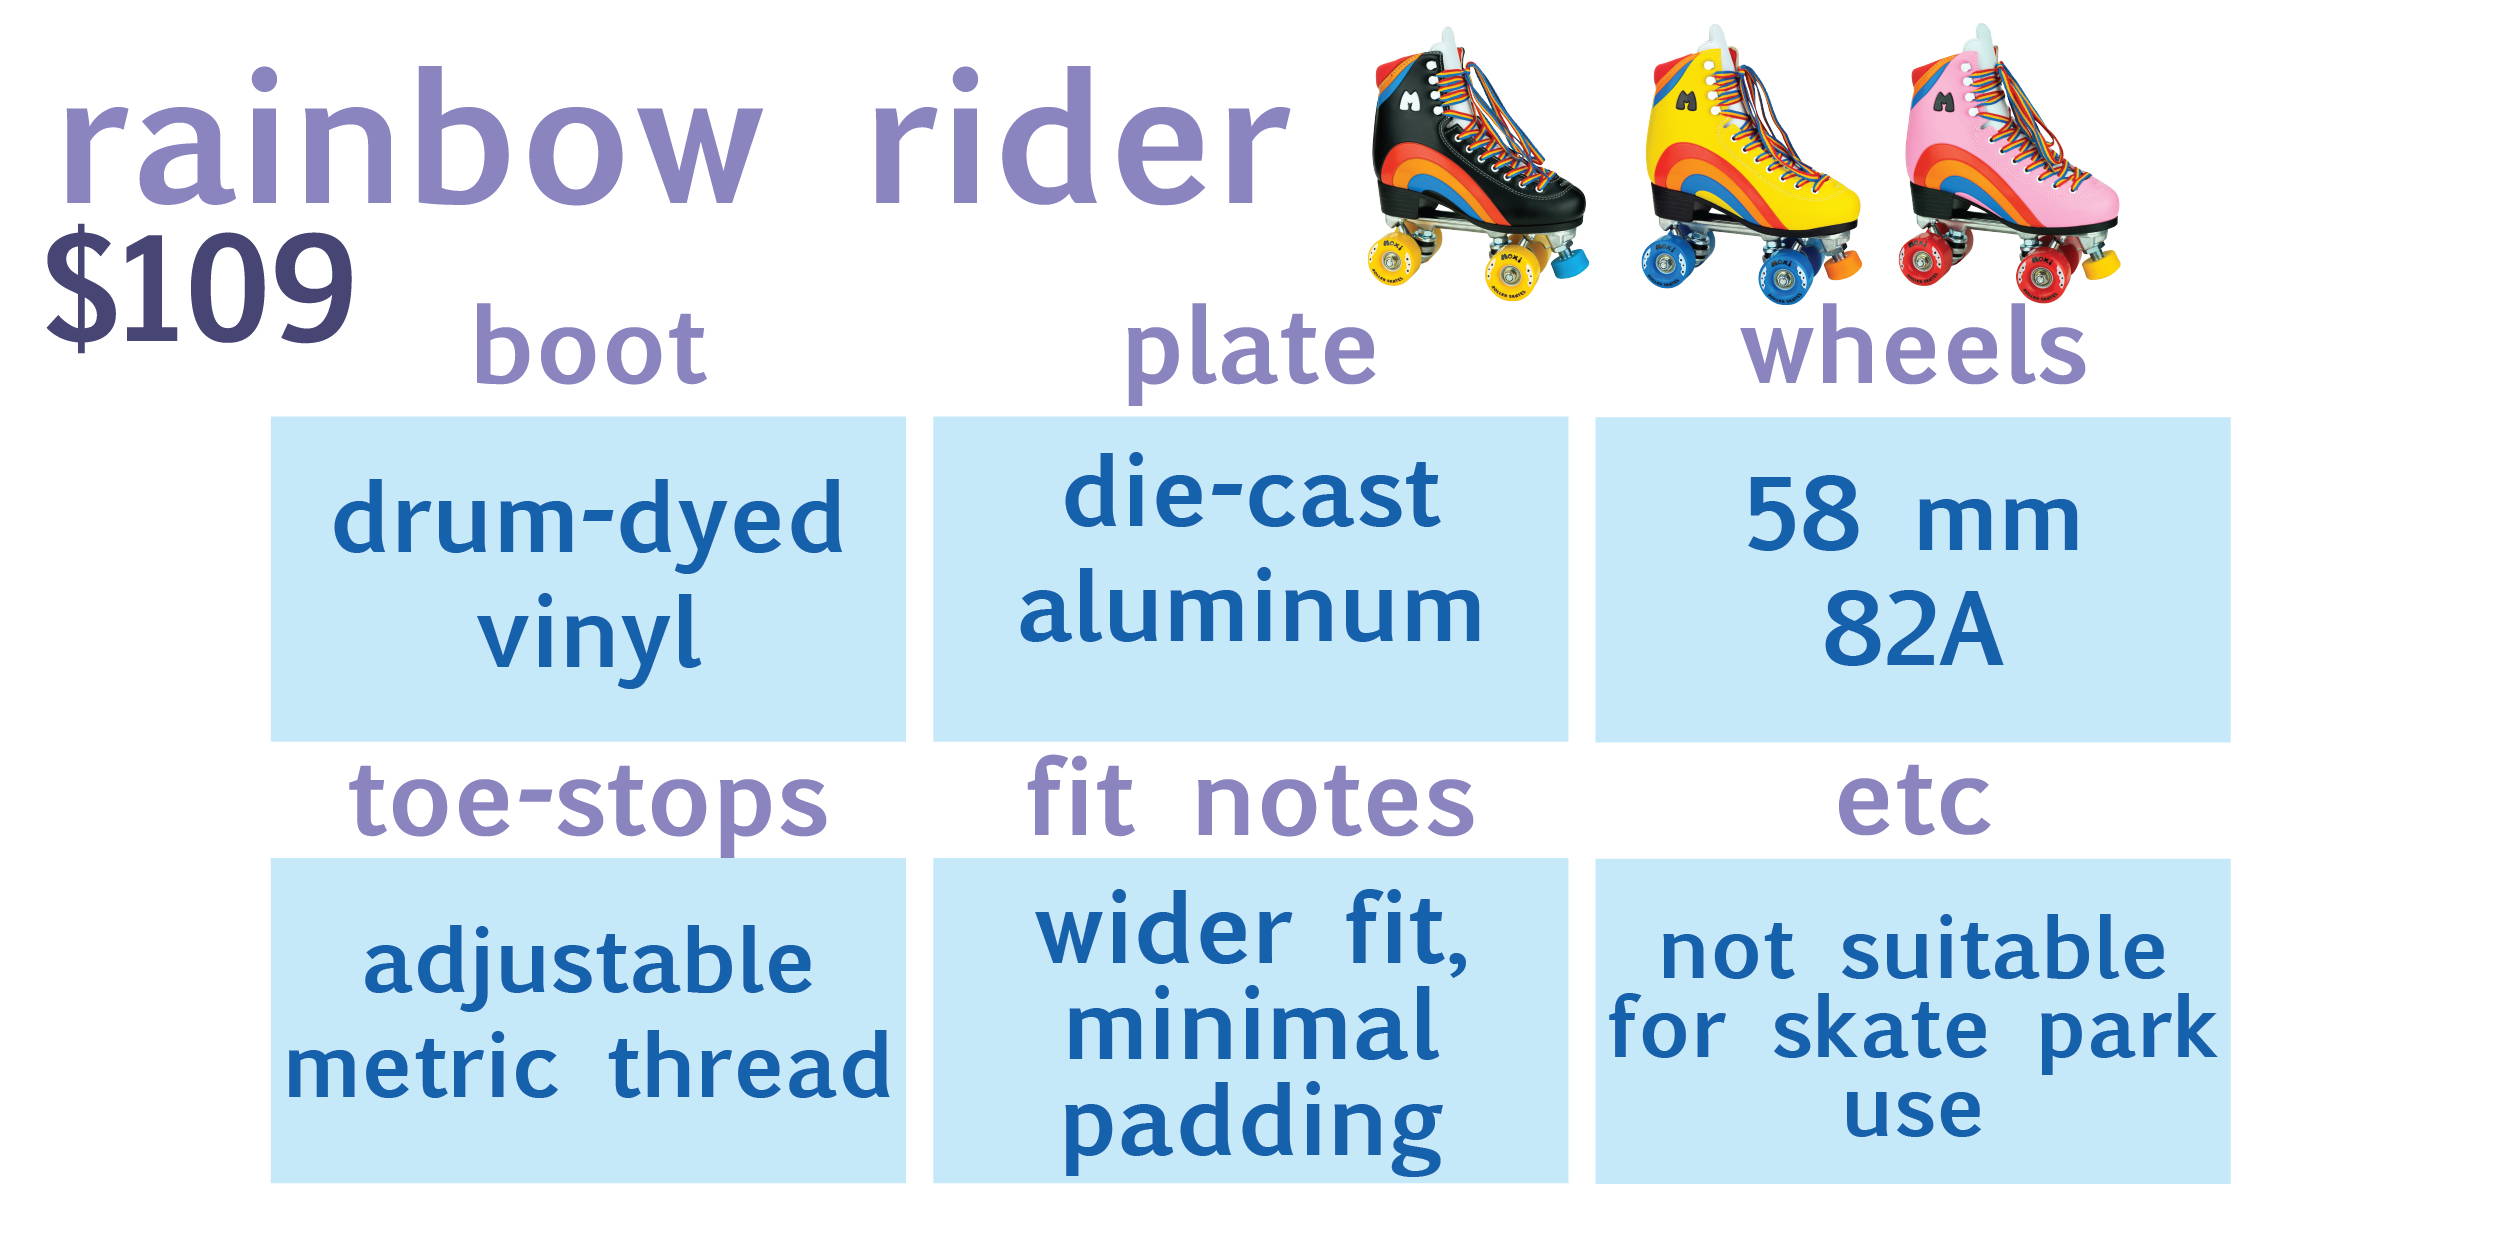 table of rainbow rider information with photo of black rainbow rider:  boot: drum dyed vinyl, plate: die-cast aluminum, wheels: 58mm, 82A, toe-stops: adjustable (metric thread), fit notes: wider fit, minimal padding